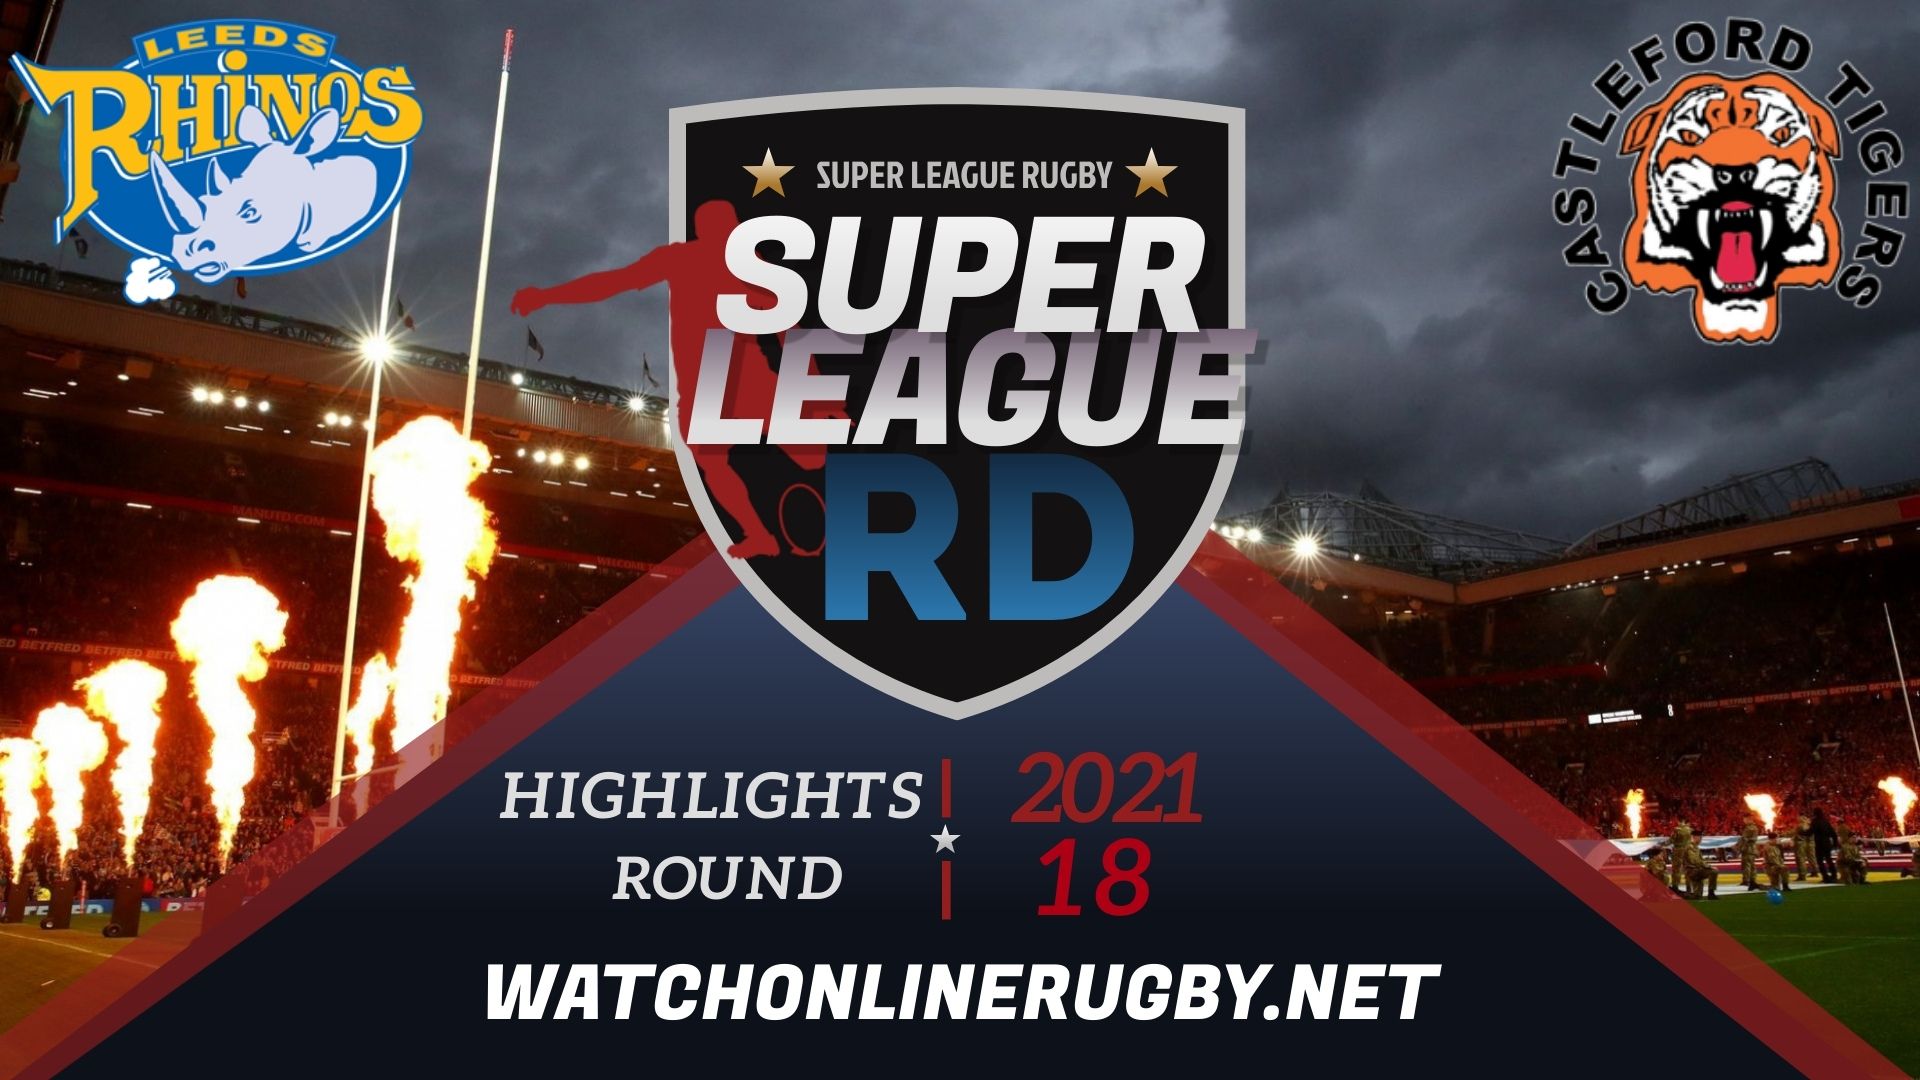 Leeds Rhinos Vs Castleford Tigers Super League Rugby 2021 RD 18